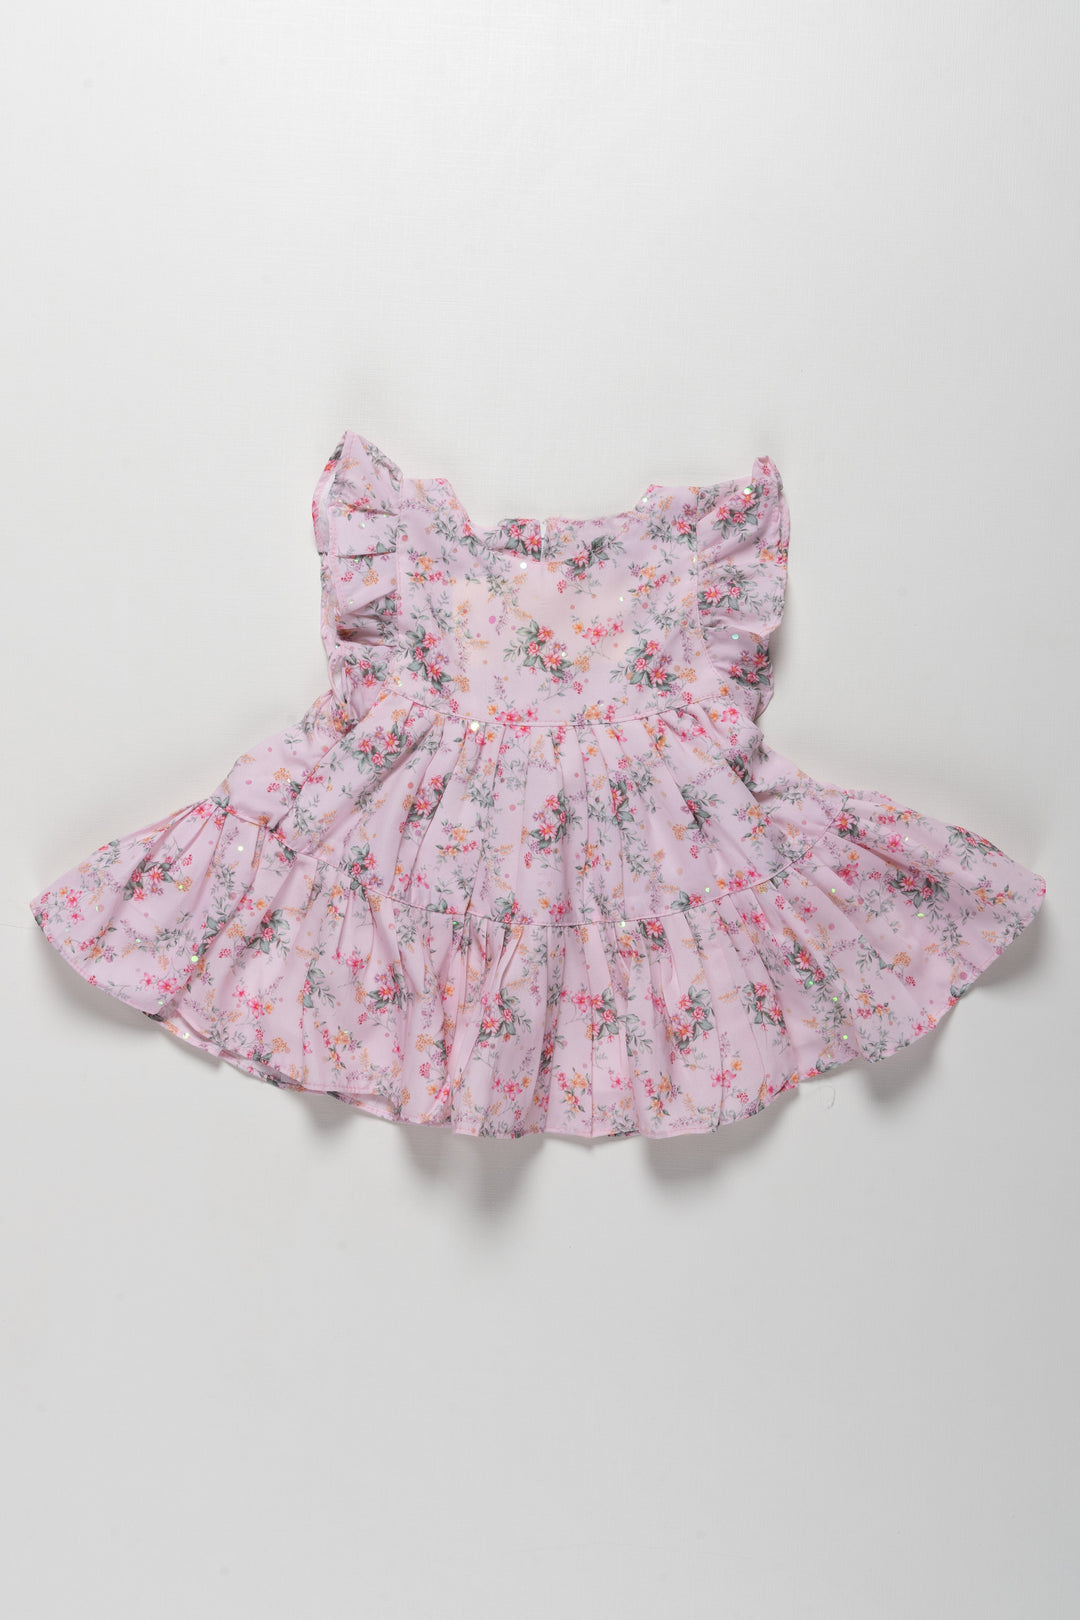 The Nesavu Baby Cotton Frocks Gorgeous Pink Floral Printed Ruffled Sleeve Cotton Frock For Girls Nesavu 12 (3M) / Pink BFJ372A-12 Floral Printed Cotton Dress | Trendy Cotton Dress For Babys | The Nesavu